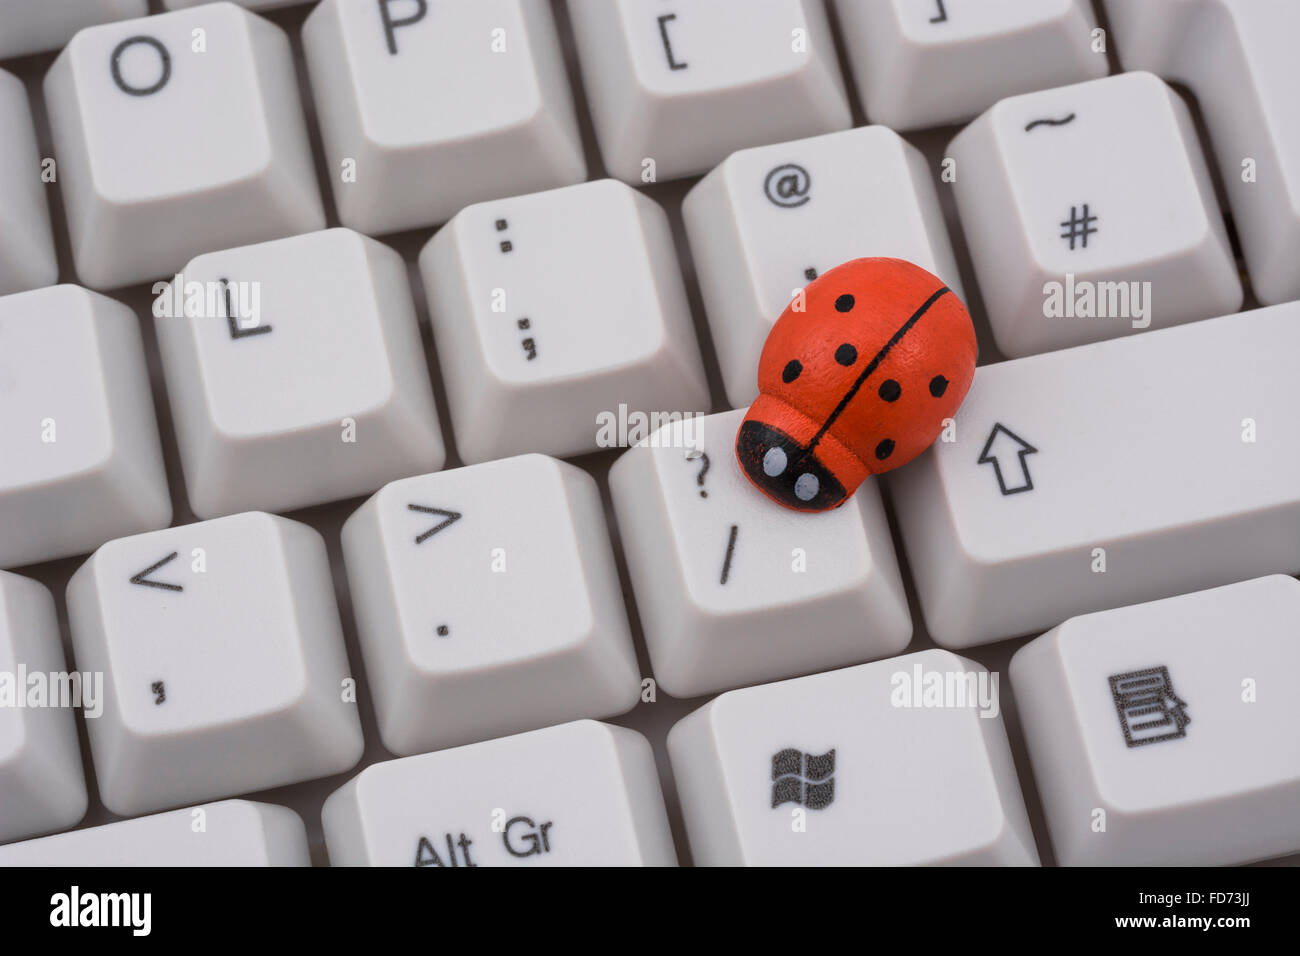 Ladybird / ladybug on PC keyboard - as a visual metaphor for the concept of 'computer bug' or viral / system 'infection'. Stock Photo